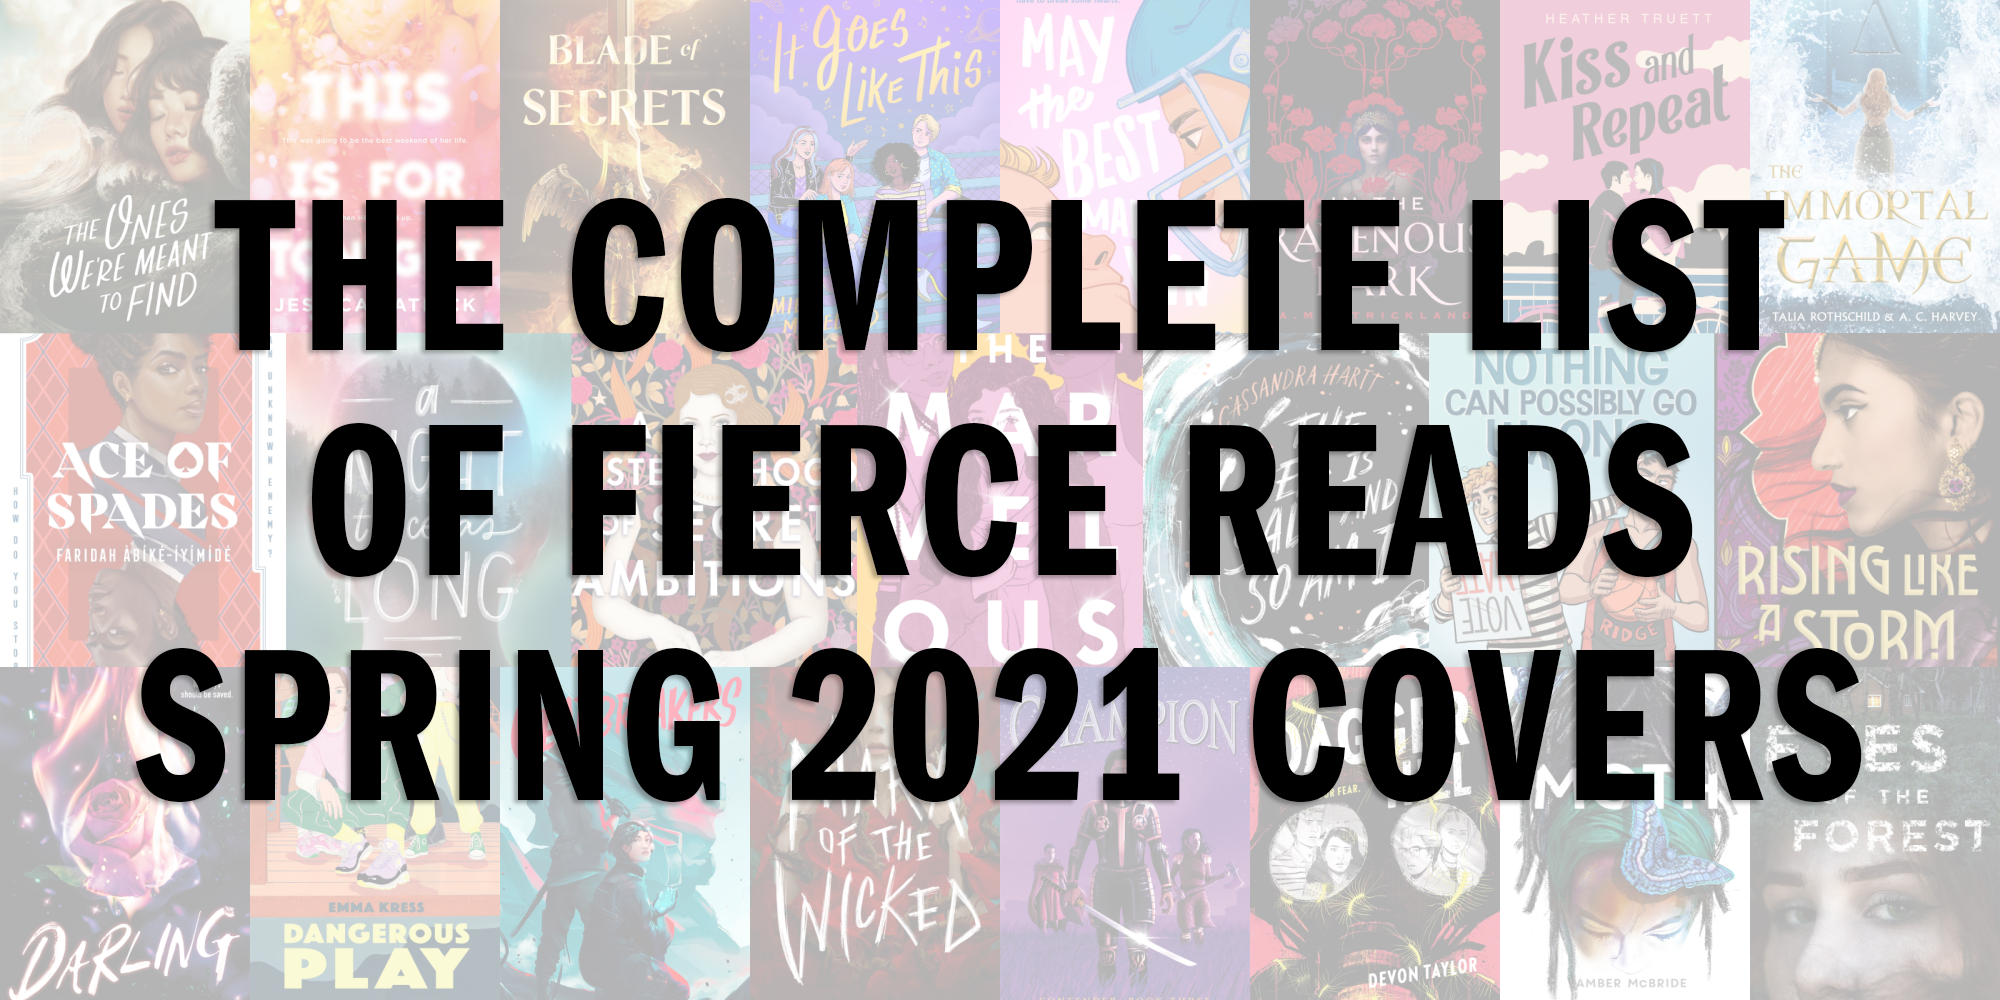 The Complete List of Fierce Reads Spring 2021 Covers